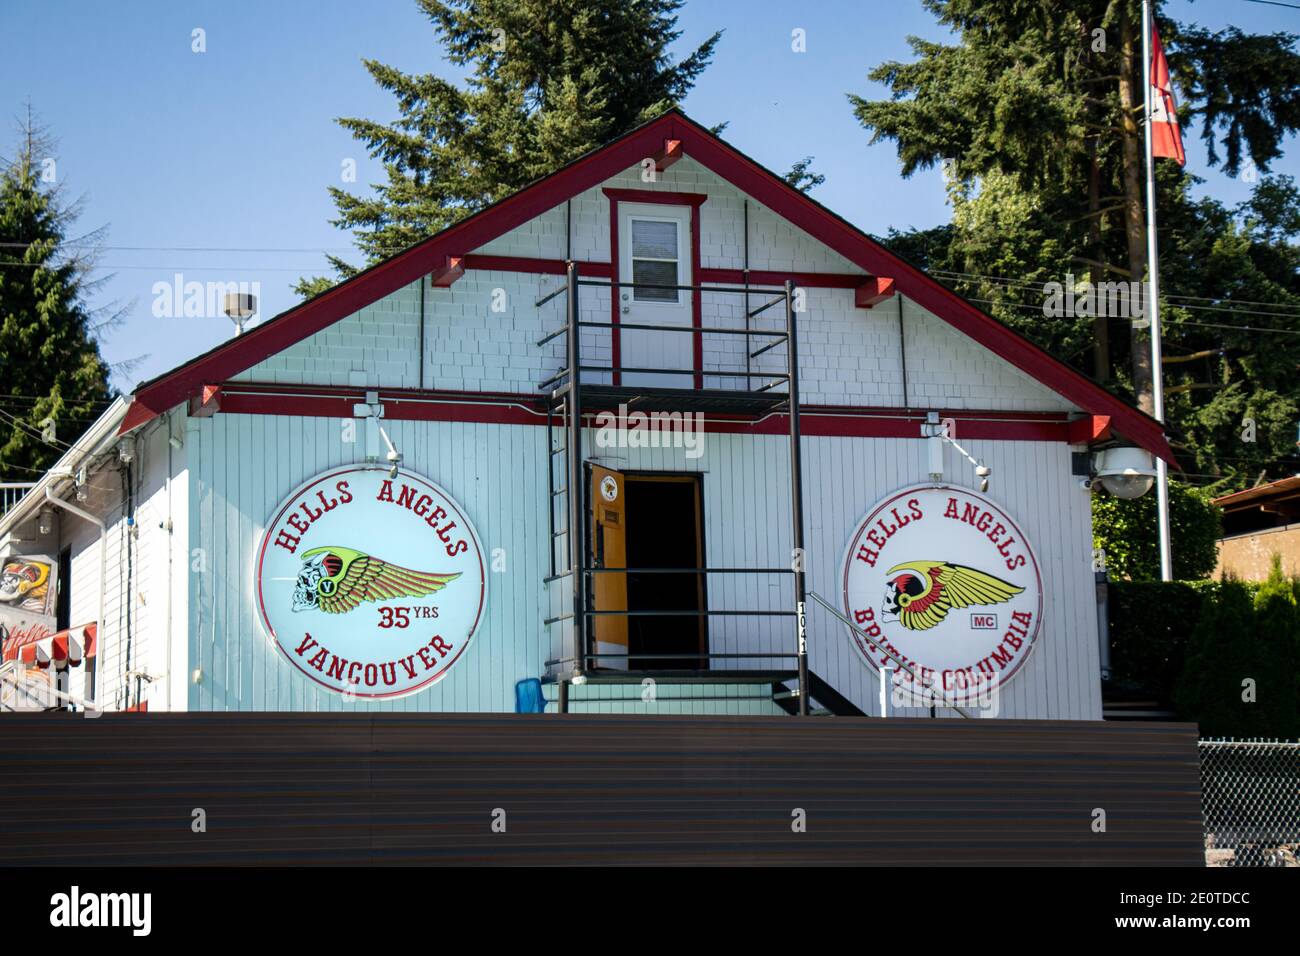 Vancouver, Canada - July 13,2020: View of sign Hells Angels Club Building in Vancouver Stock Photo